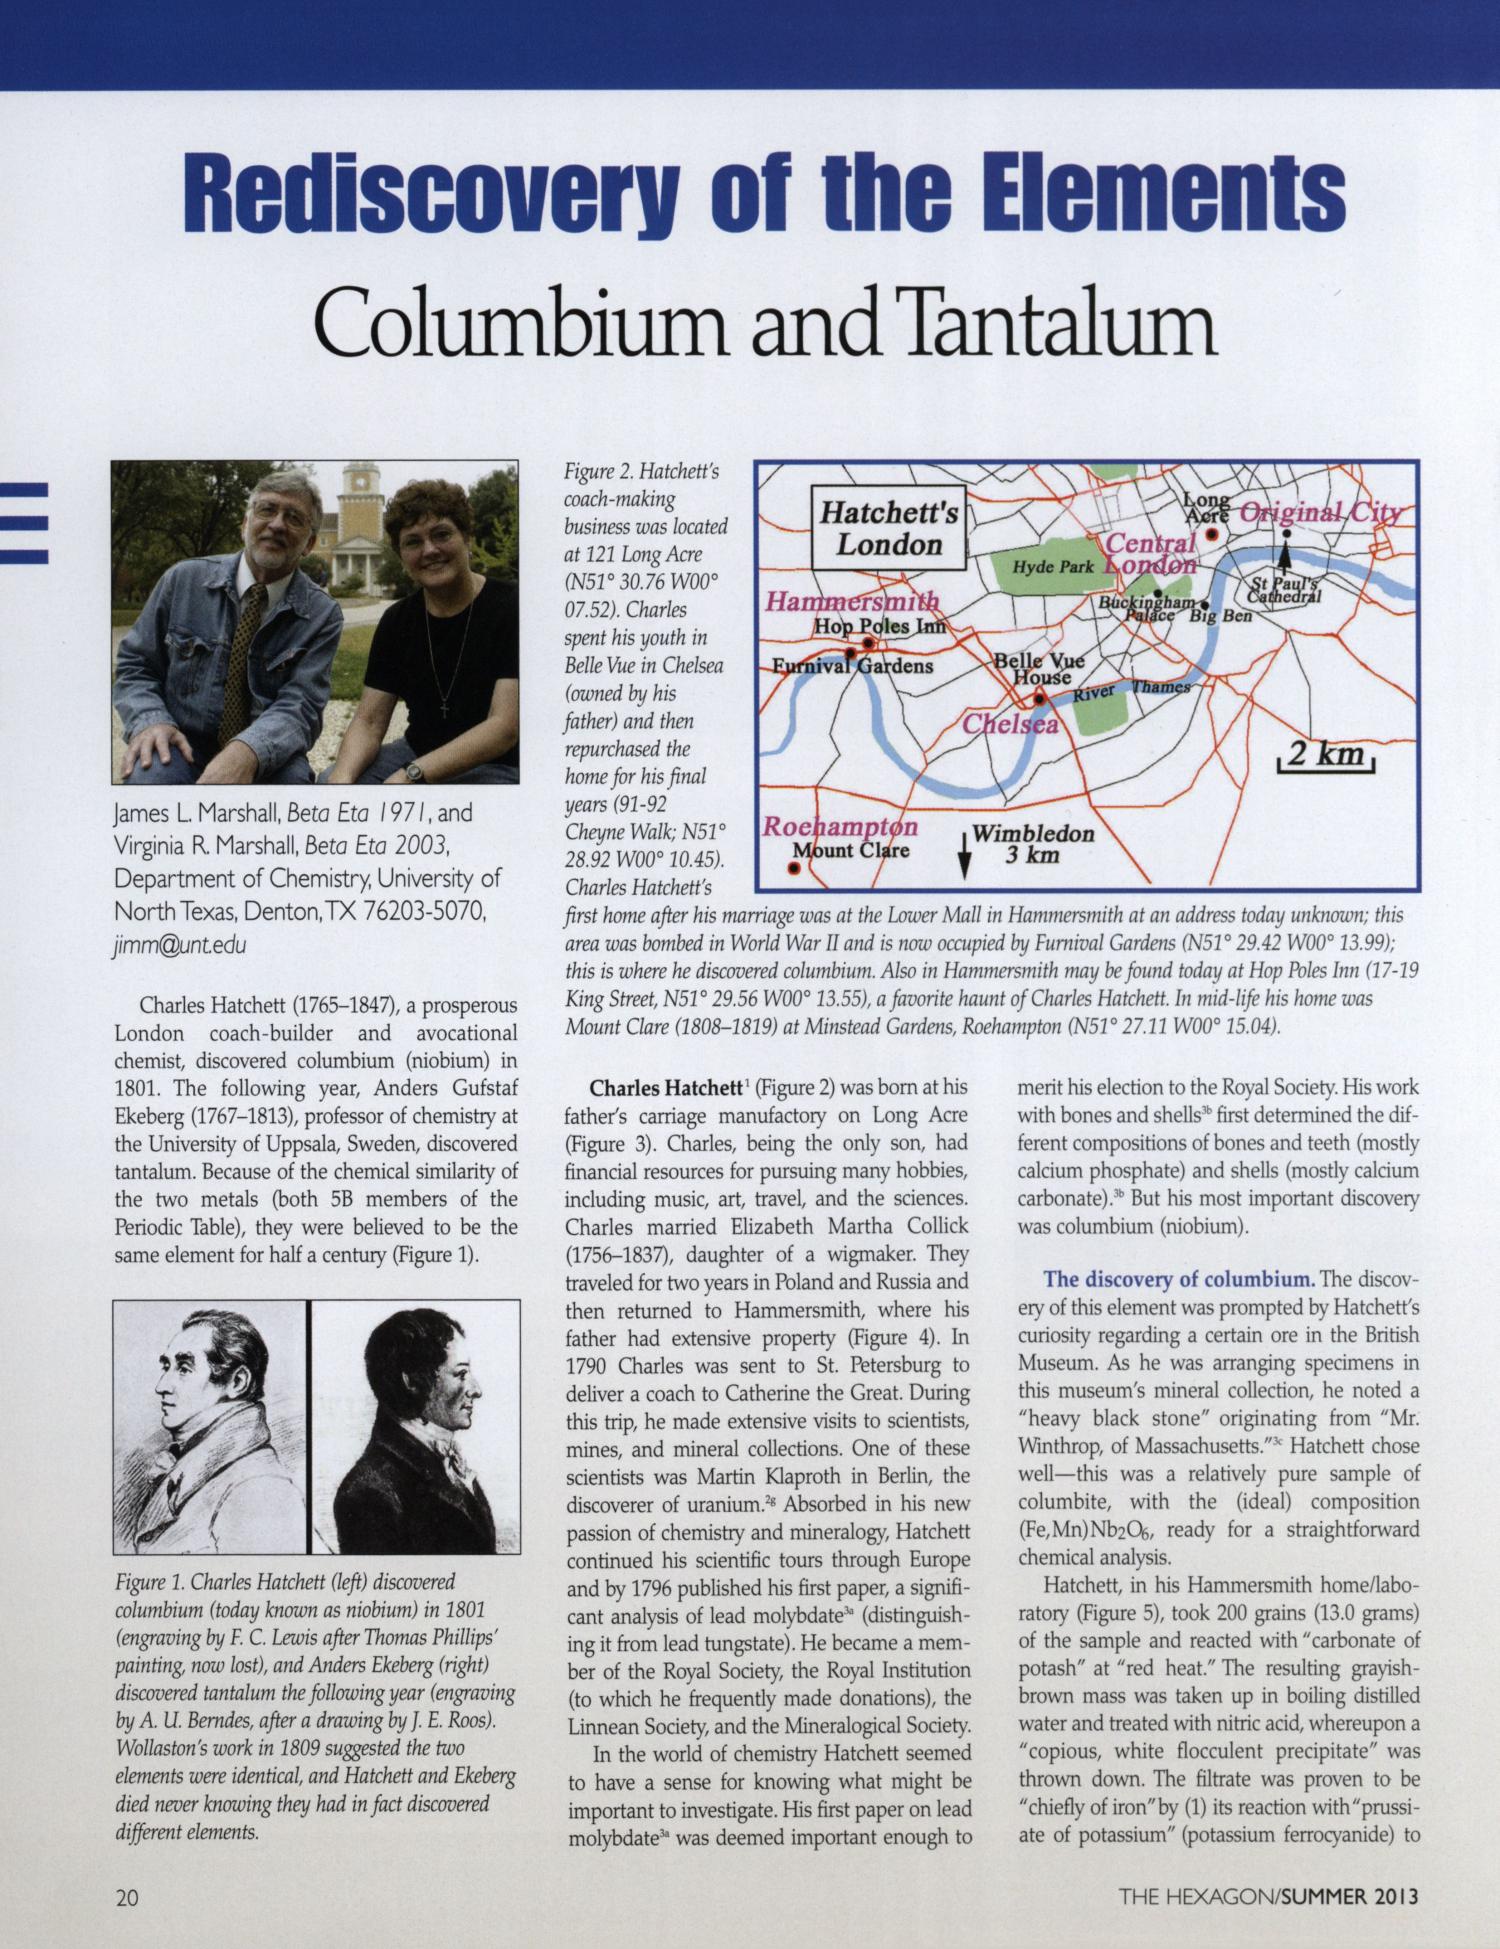 Rediscovery of the Elements: Columbium and Tantalum
                                                
                                                    20
                                                